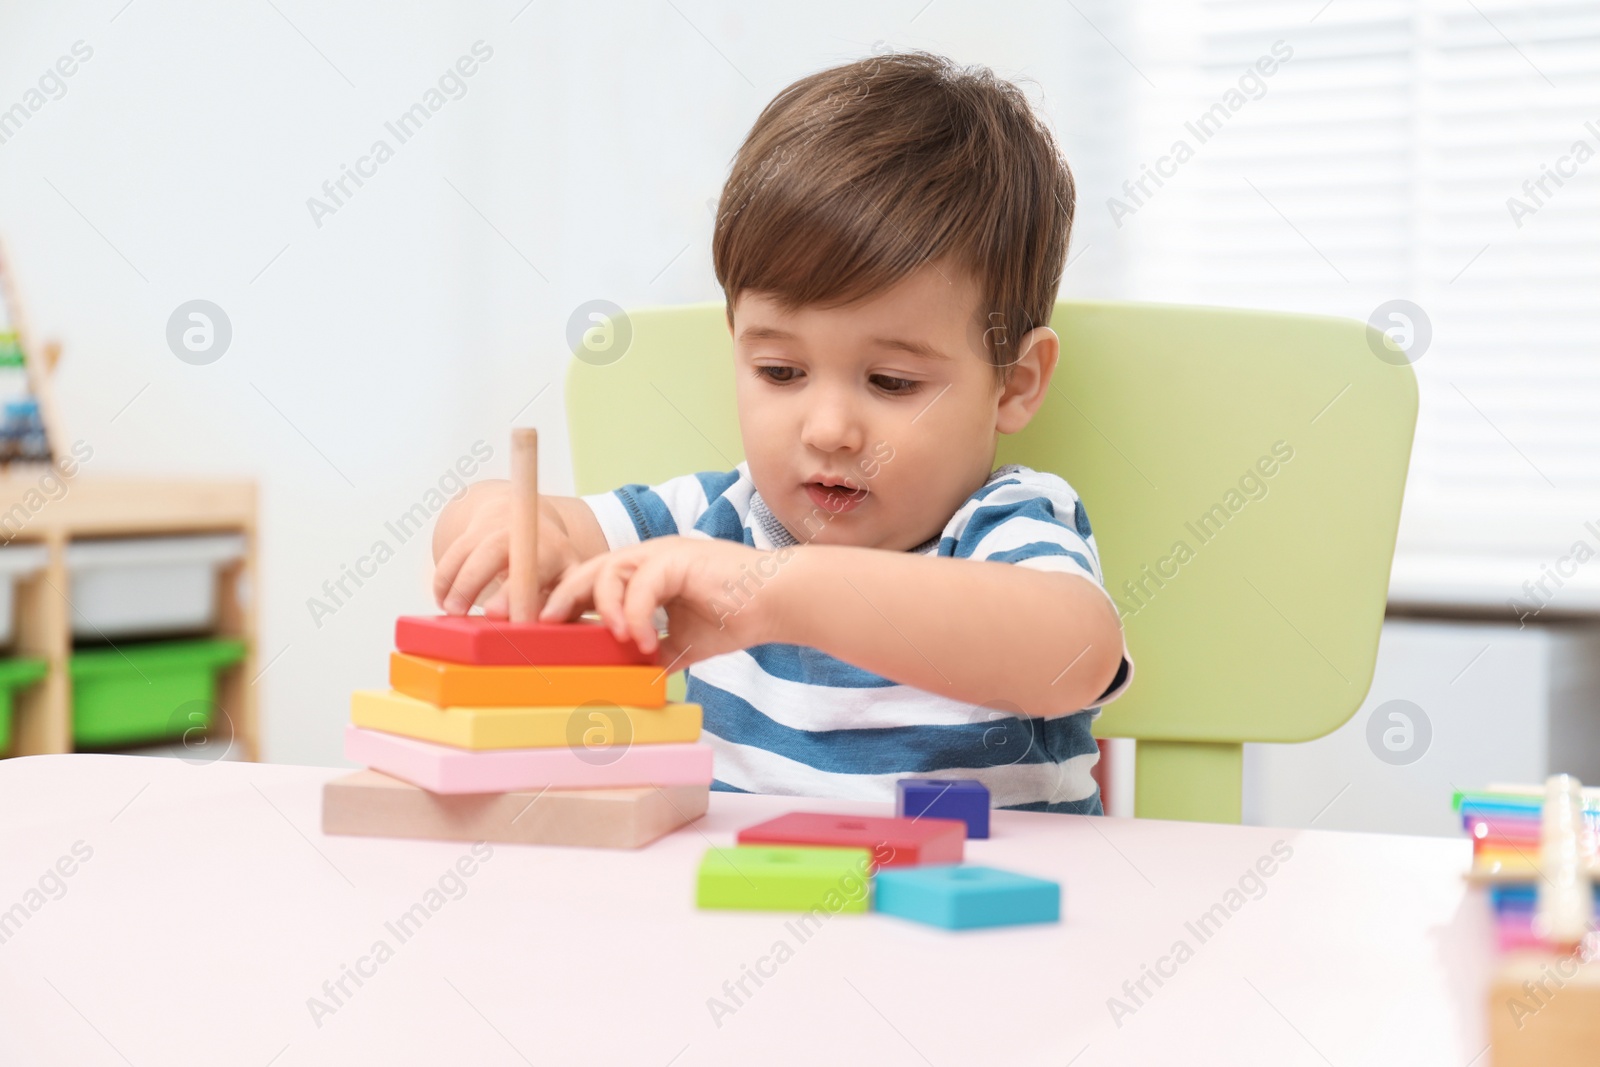 Photo of Little child playing with toy pyramid at table